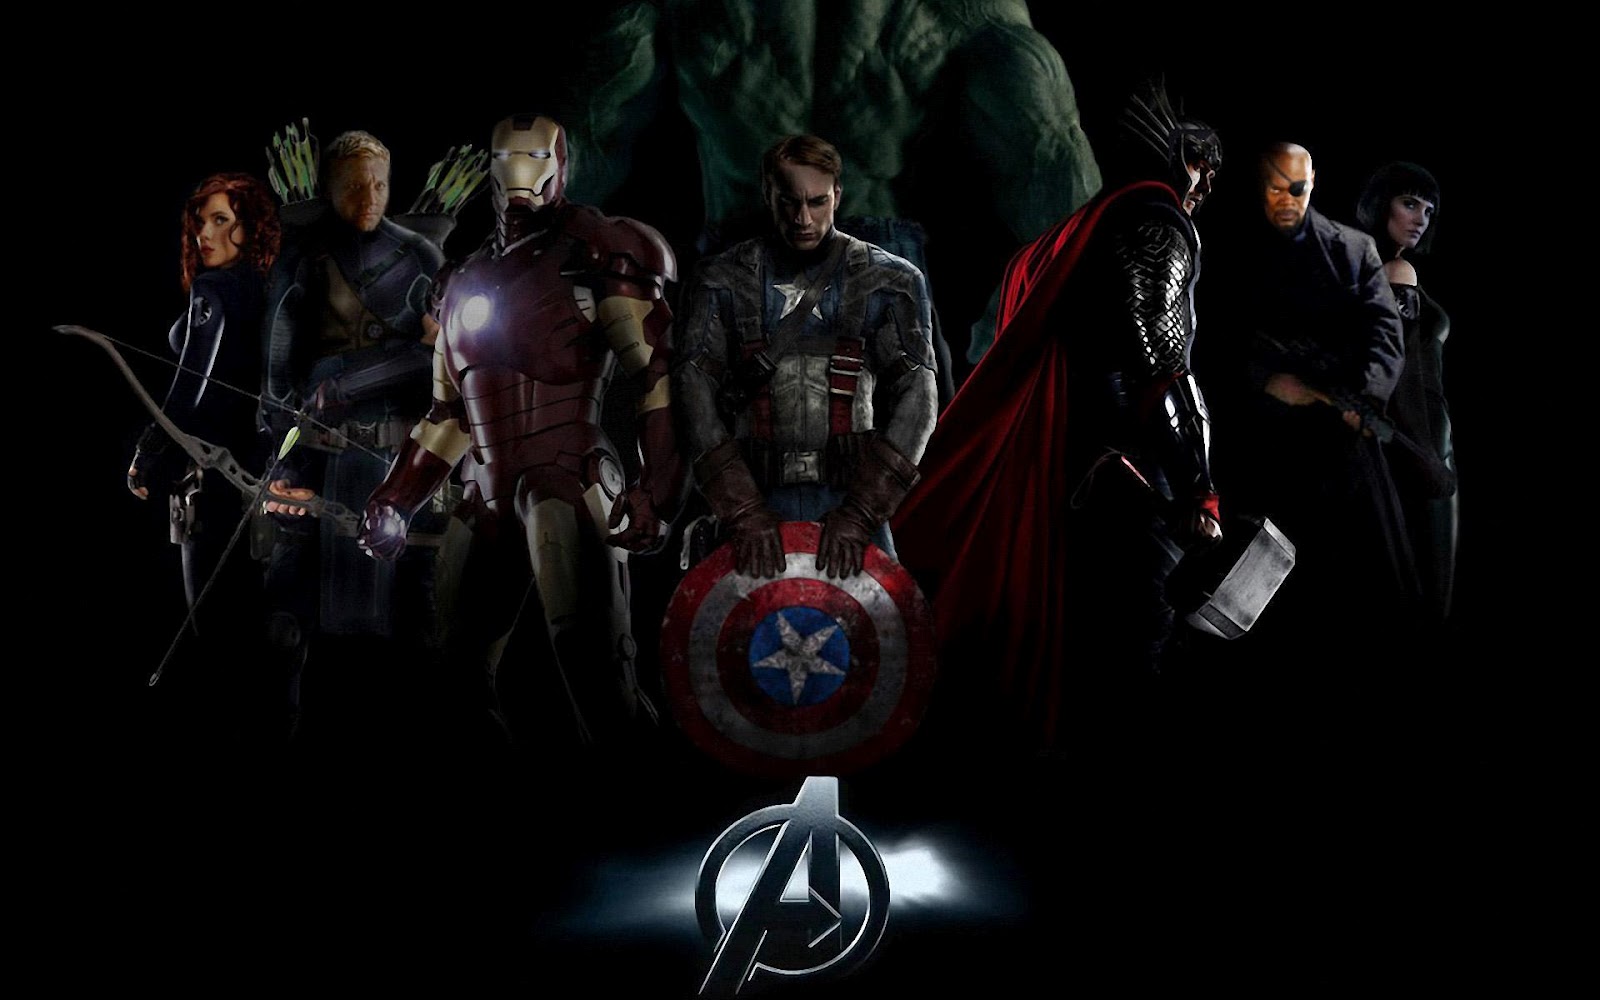 HD wallpaper The Avengers Movie Hd Wallpapers HD Pictures 2013 by